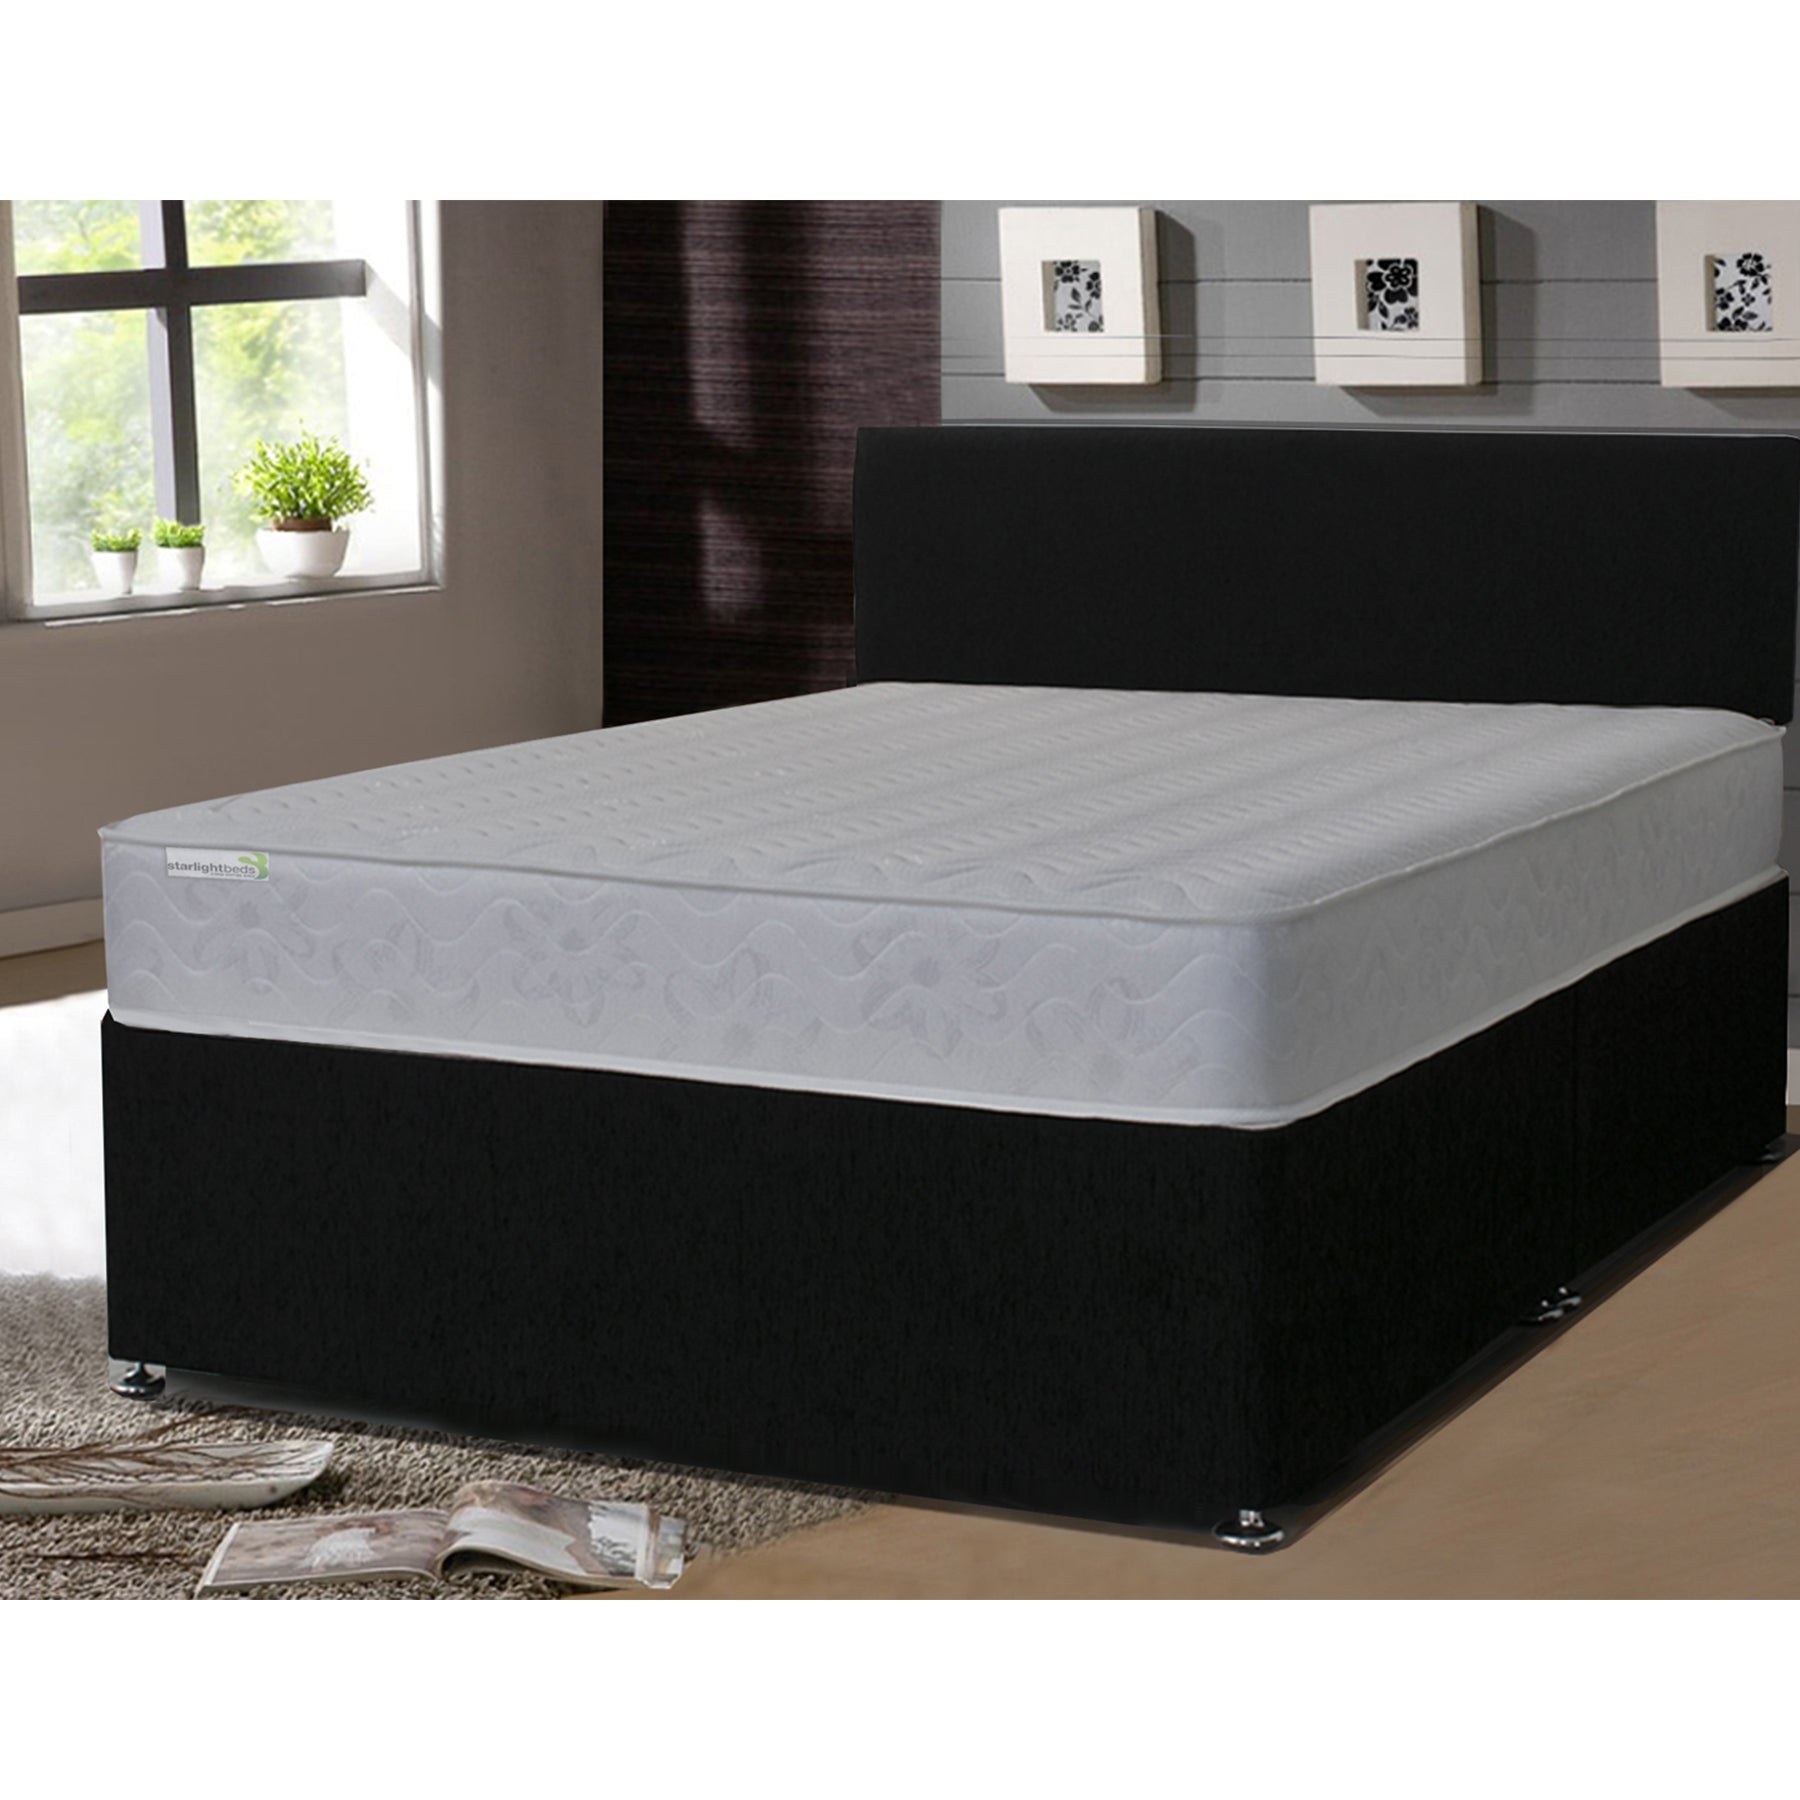 Starlight Beds™ 6.5" Deep Cool Touch Fabric Semi-Orthopedic Anti-Dust Spring Mattress for Every Age